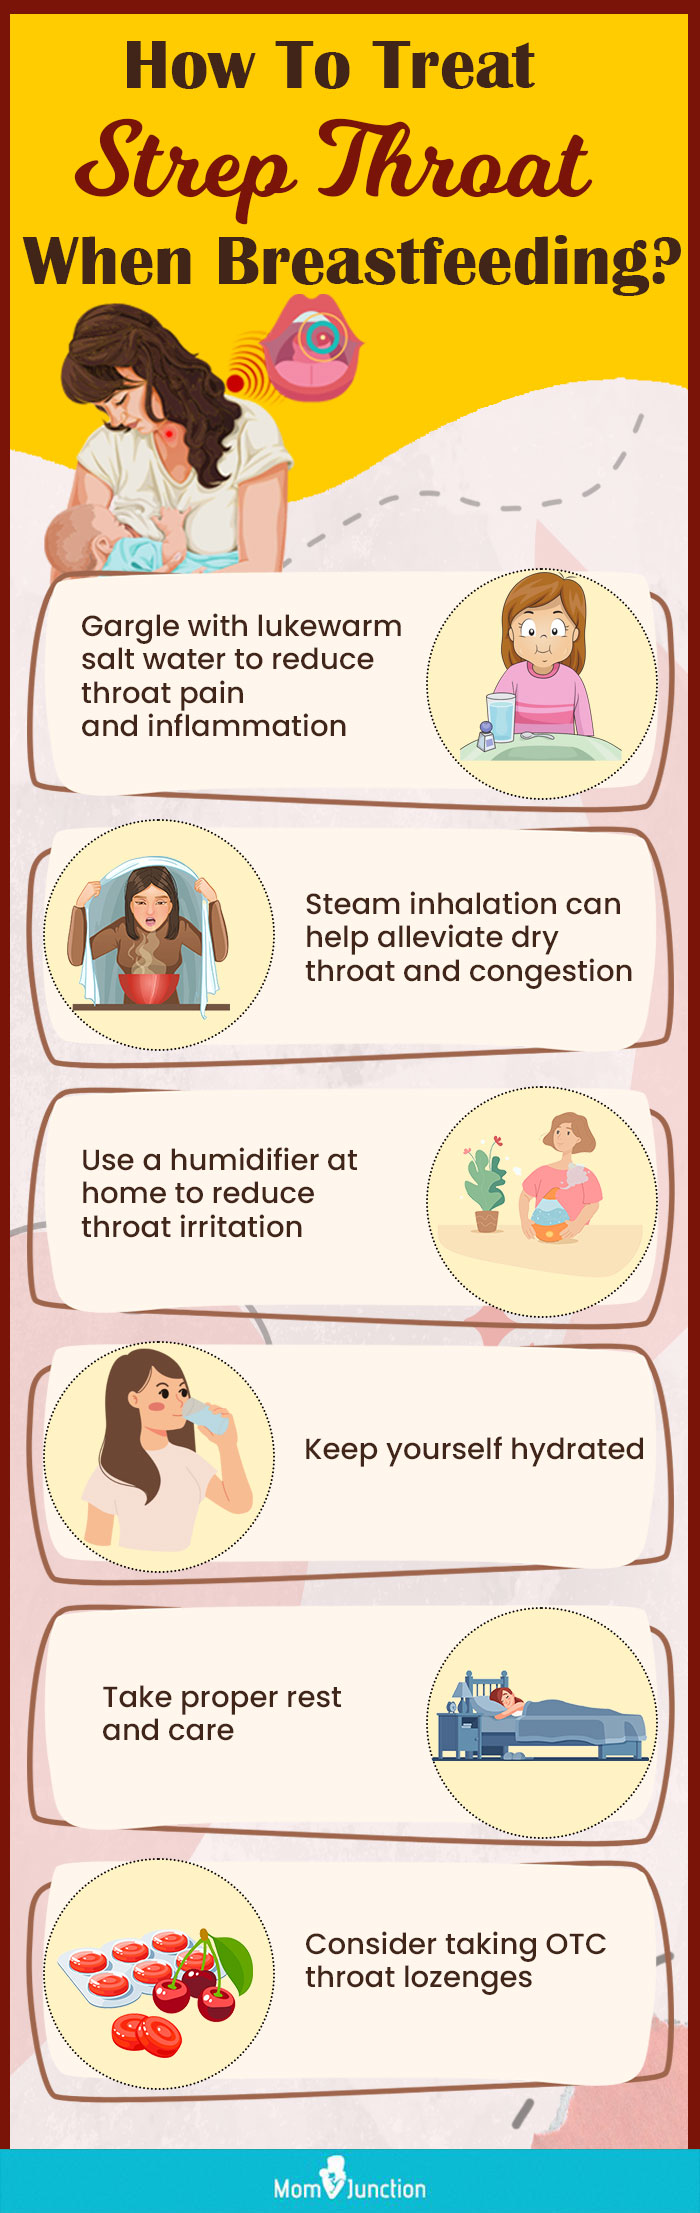 Itchy Breast during Breastfeeding: Causes & Home Remedies